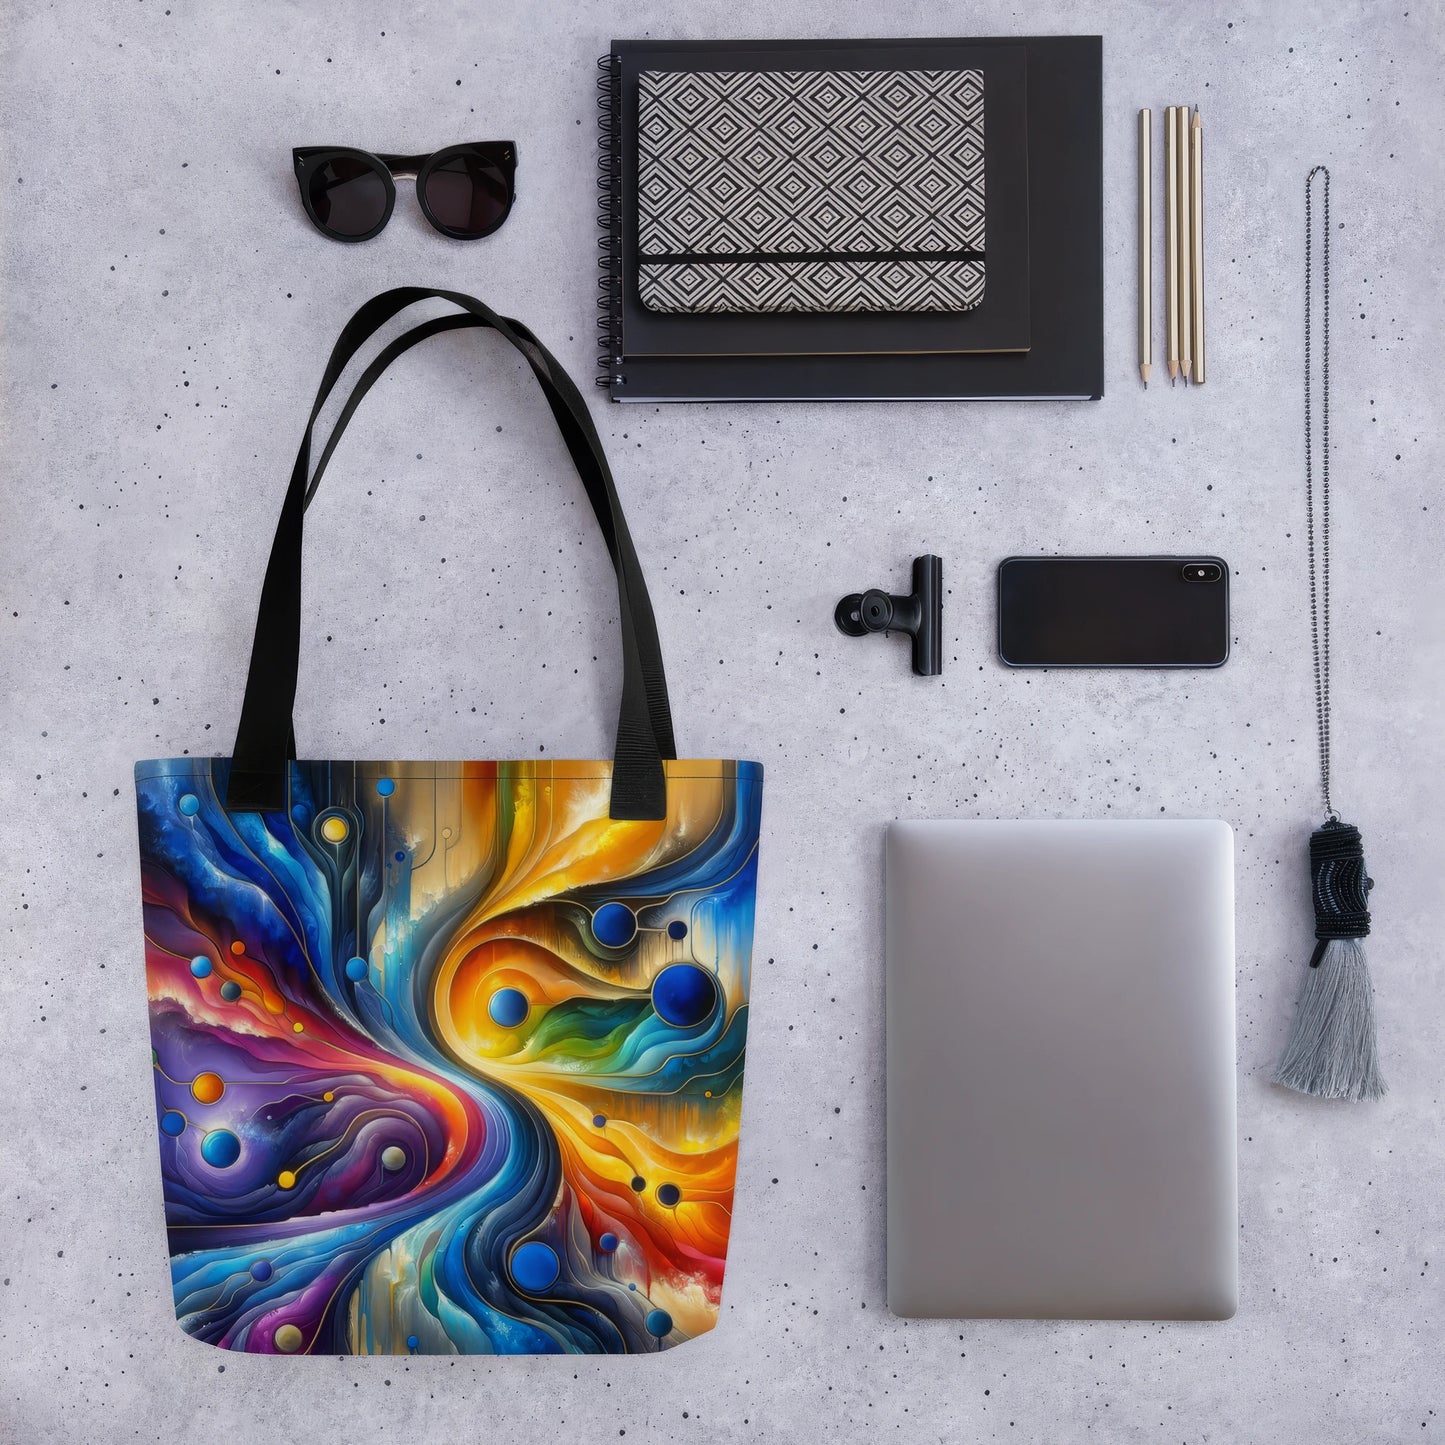 Abstract Art Tote Bag: Continuum of Connection